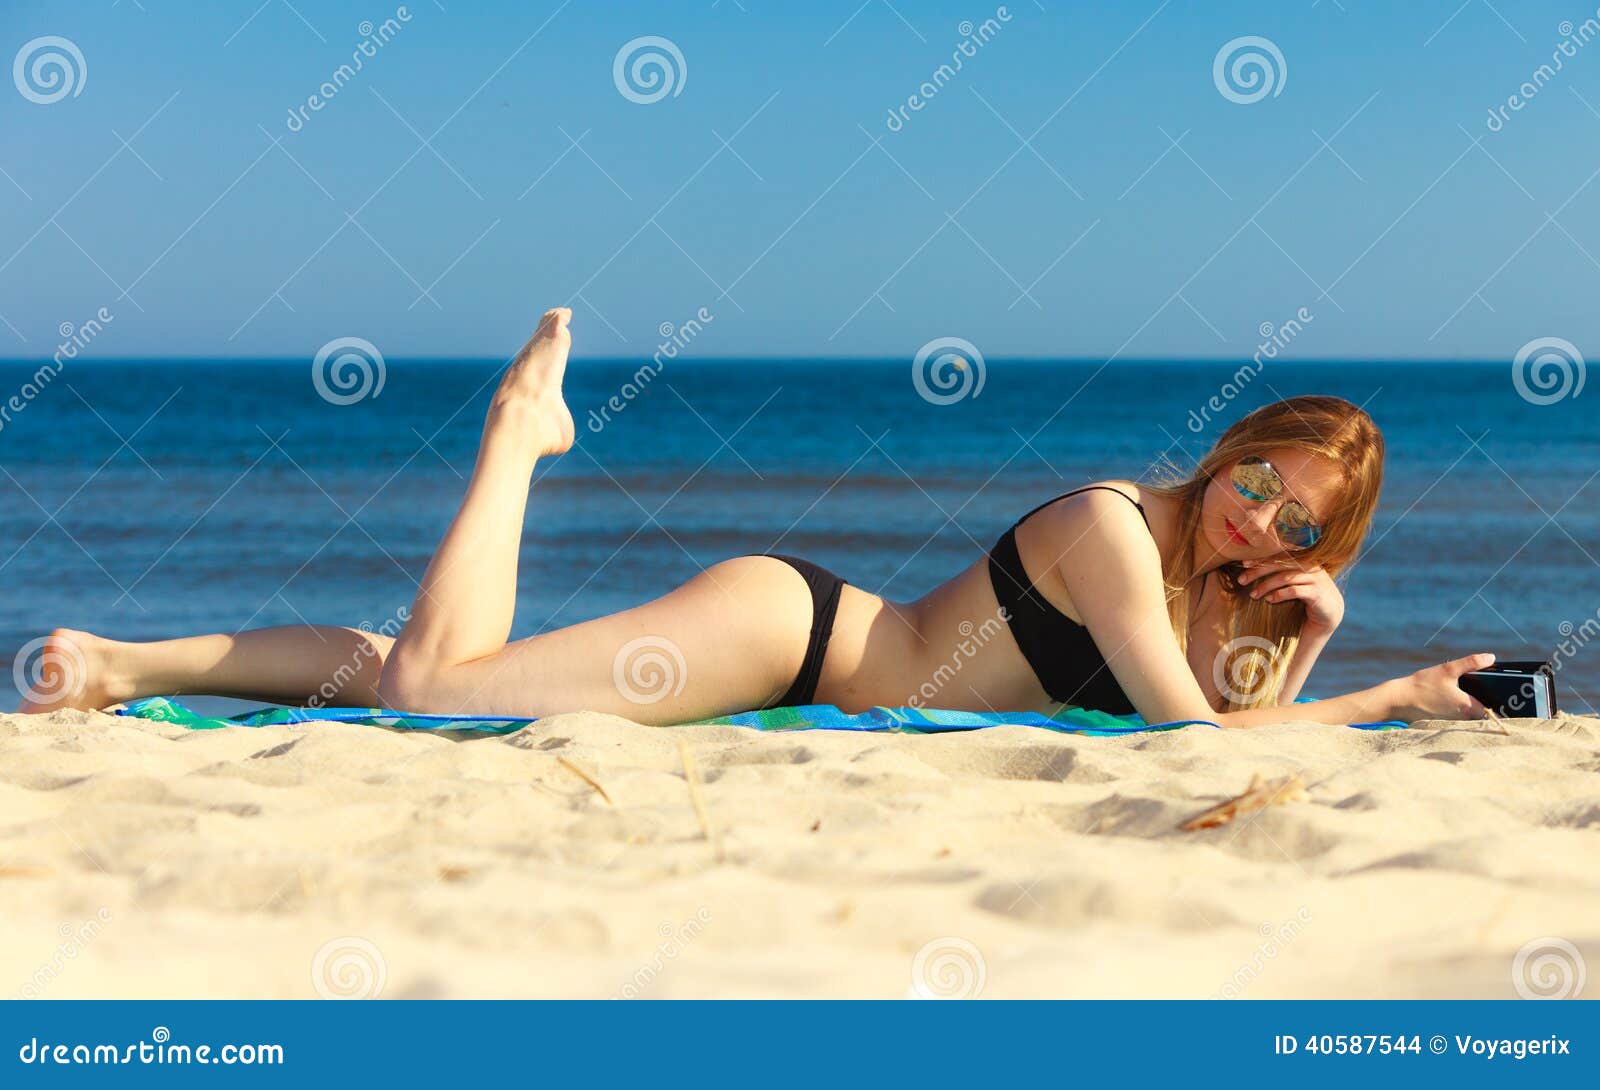 Summer Vacation Girl with Phone Tanning on Beach Stock Photo photo pic